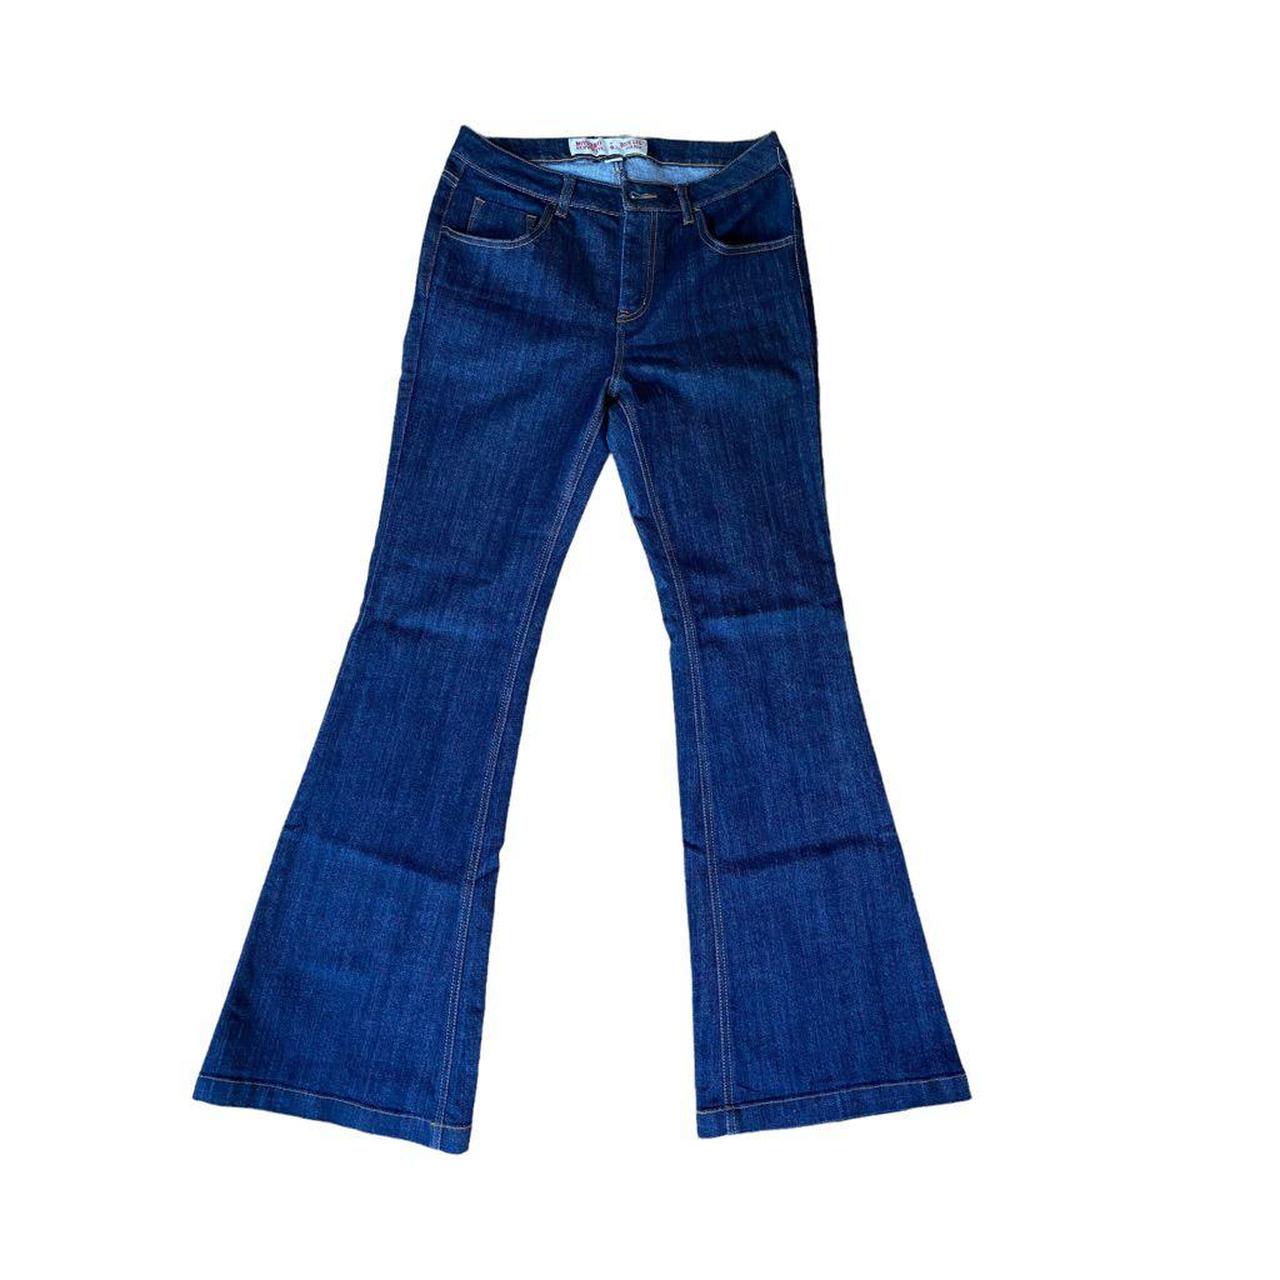 Product Image 1 - Mossimo bell bottom jeans size